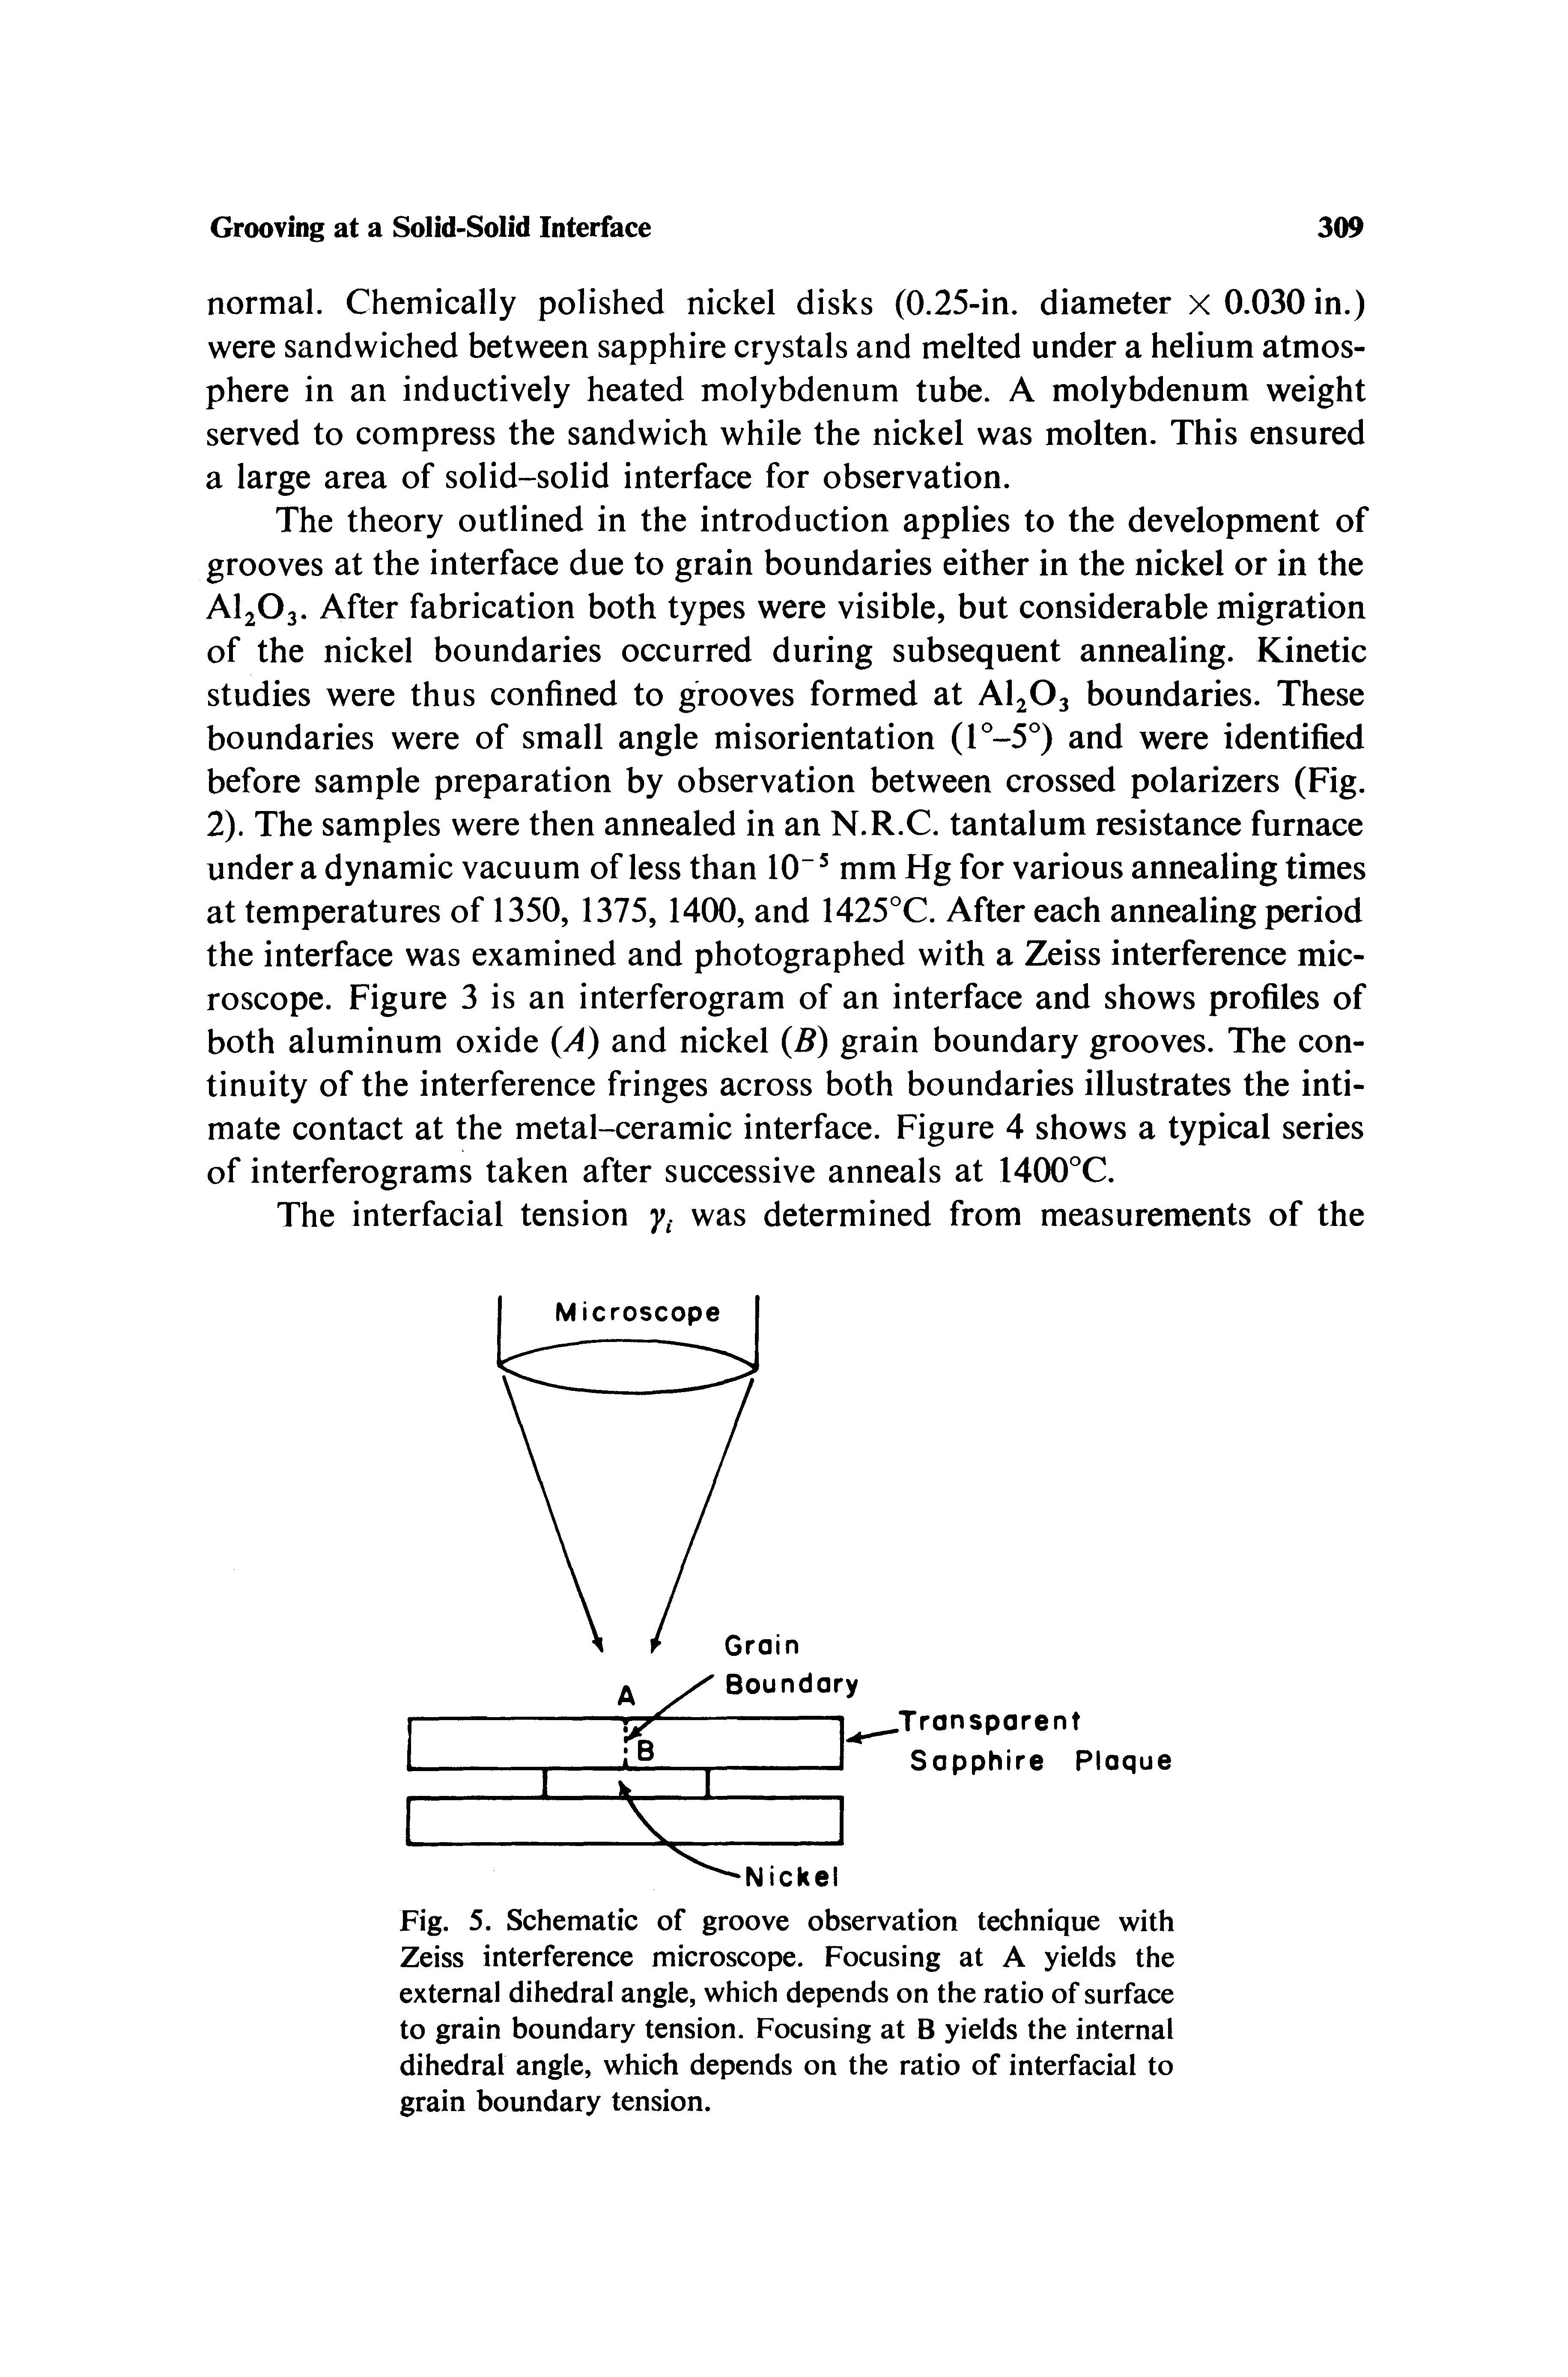 Fig. 5. Schematic of groove observation technique with Zeiss interference microscope. Focusing at A yields the external dihedral angle, which depends on the ratio of surface to grain boundary tension. Focusing at B yields the internal dihedral angle, which depends on the ratio of interfacial to grain boundary tension.